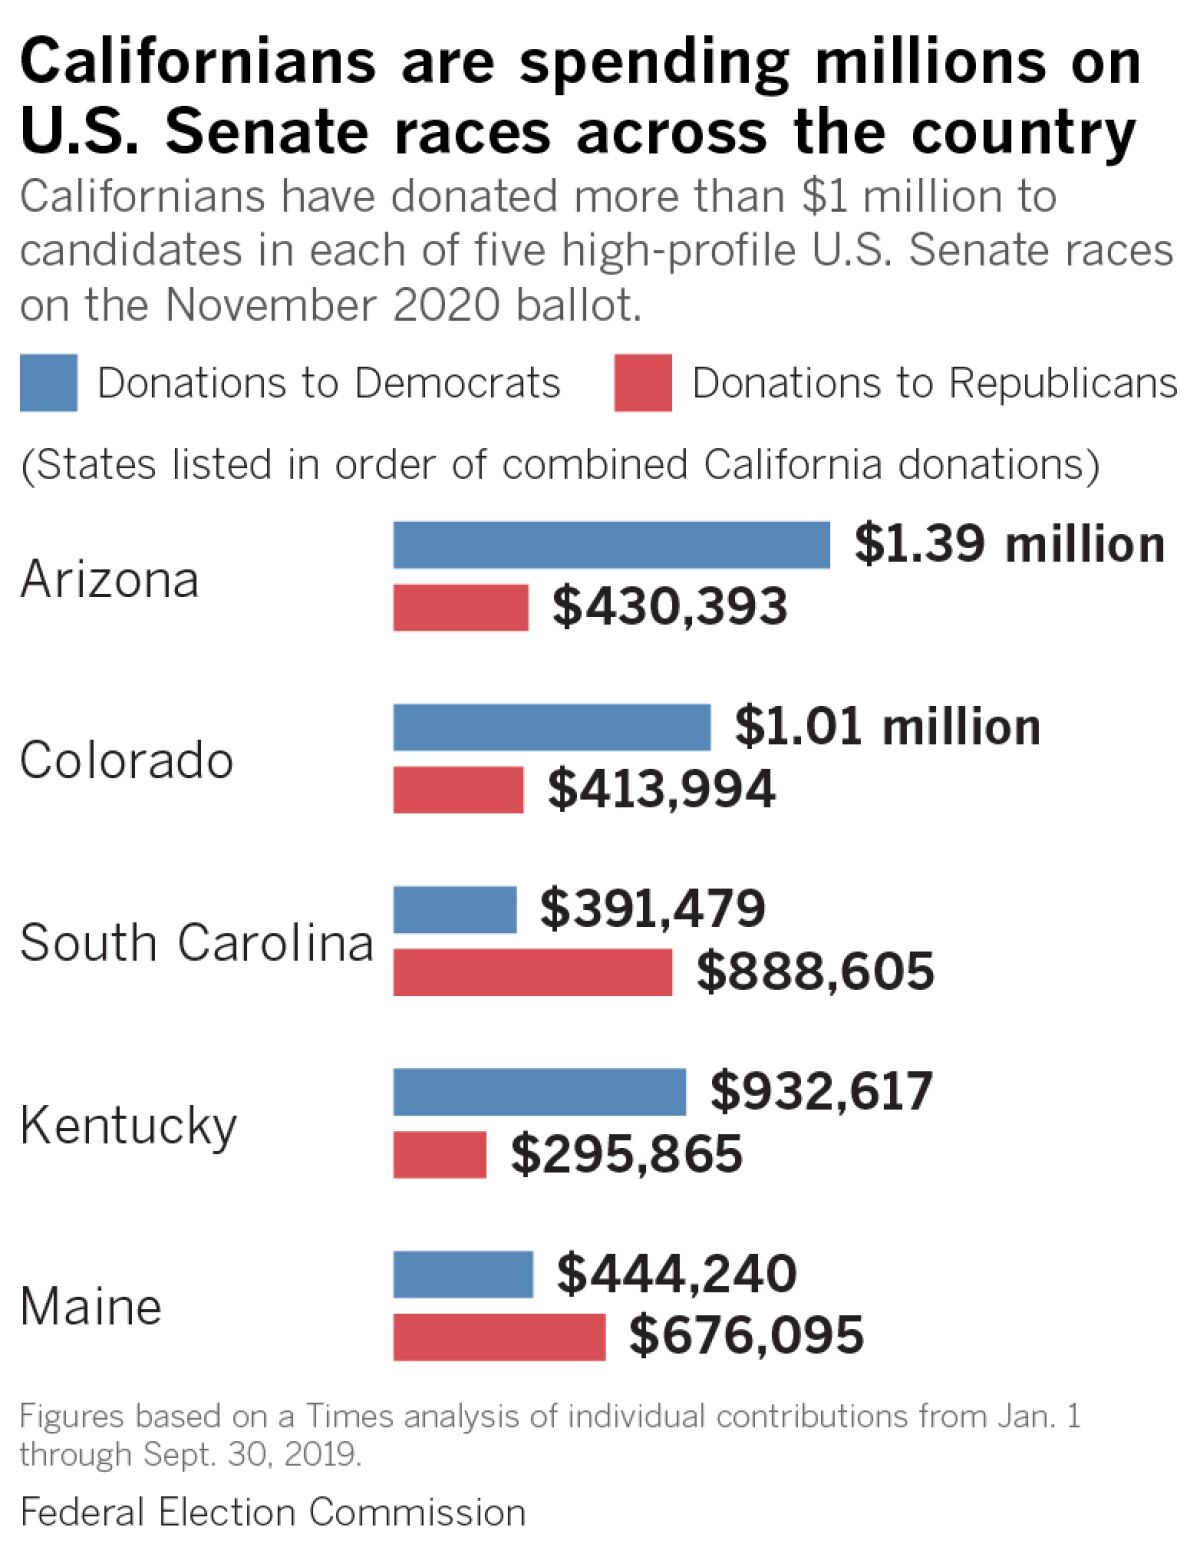 Californians are spending millions on U.S. Senate races. Californians have donated more than $1 million to candidates in each of five high-profile U.S. Senate races on the November 2020 ballot.